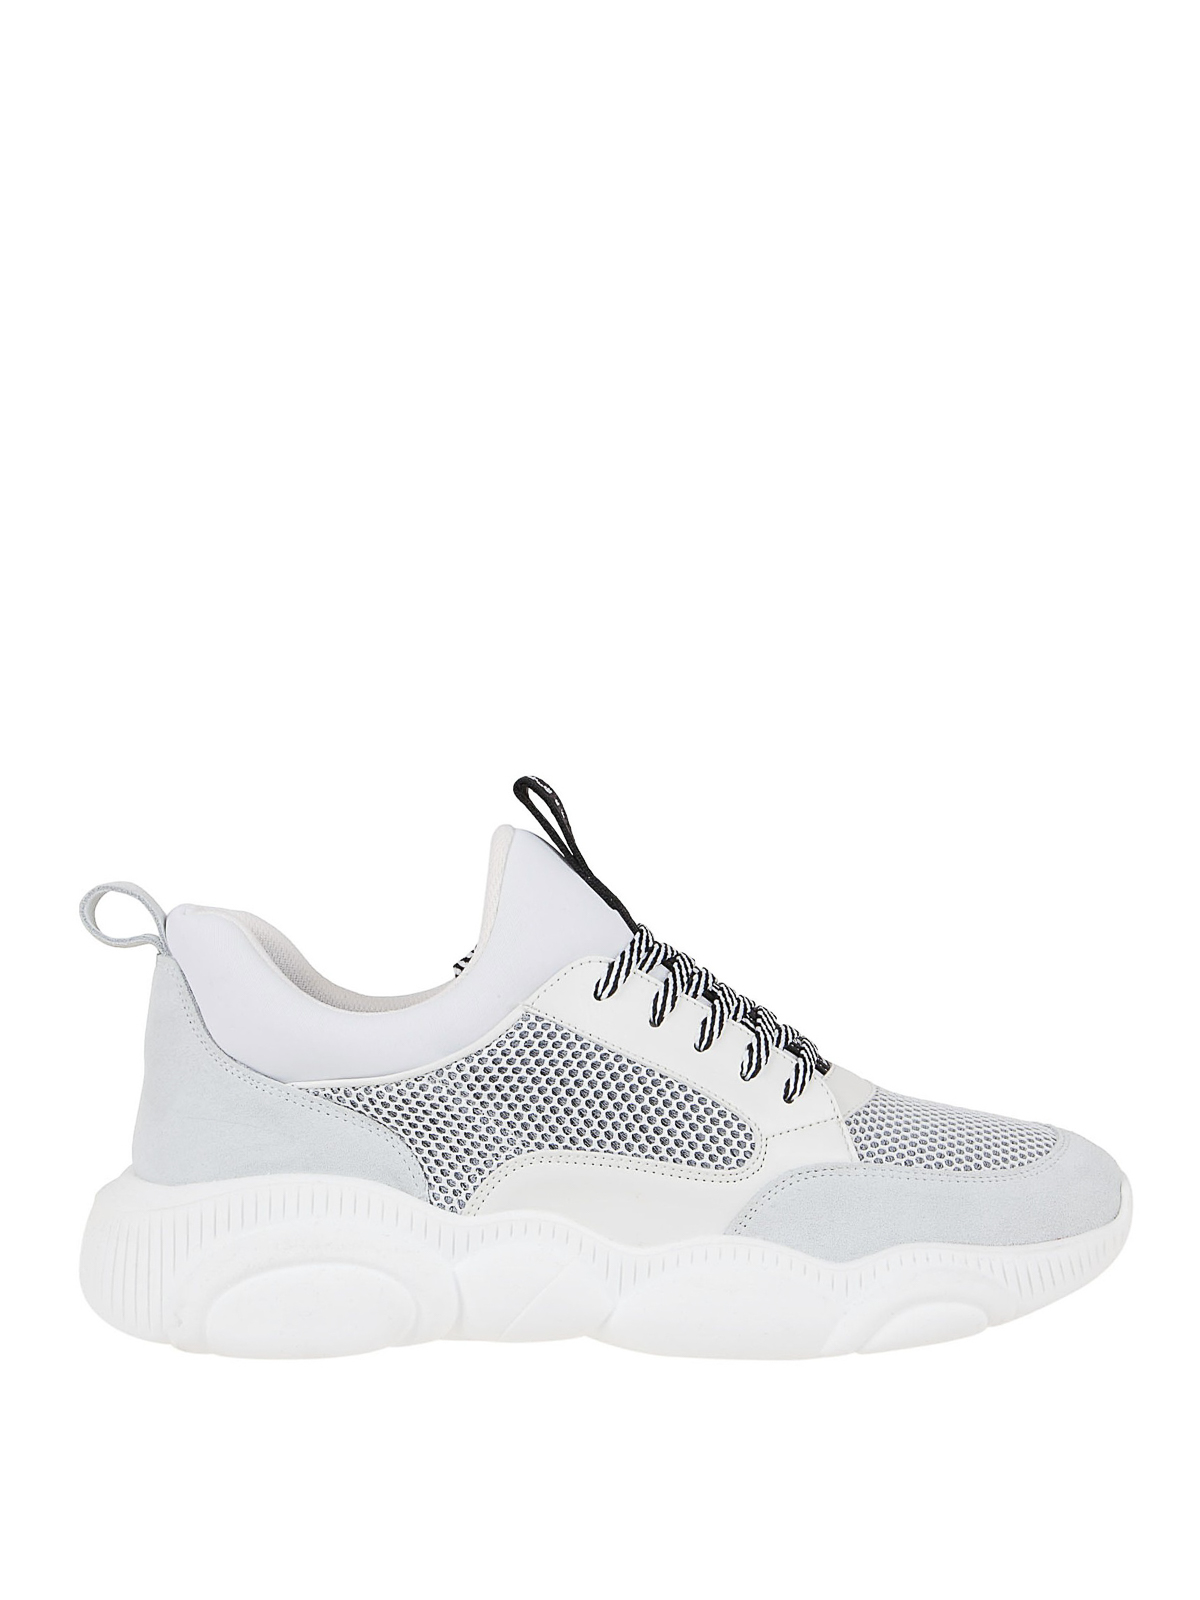 Moschino Mesh And Faux Leather Sneakers In Blanco